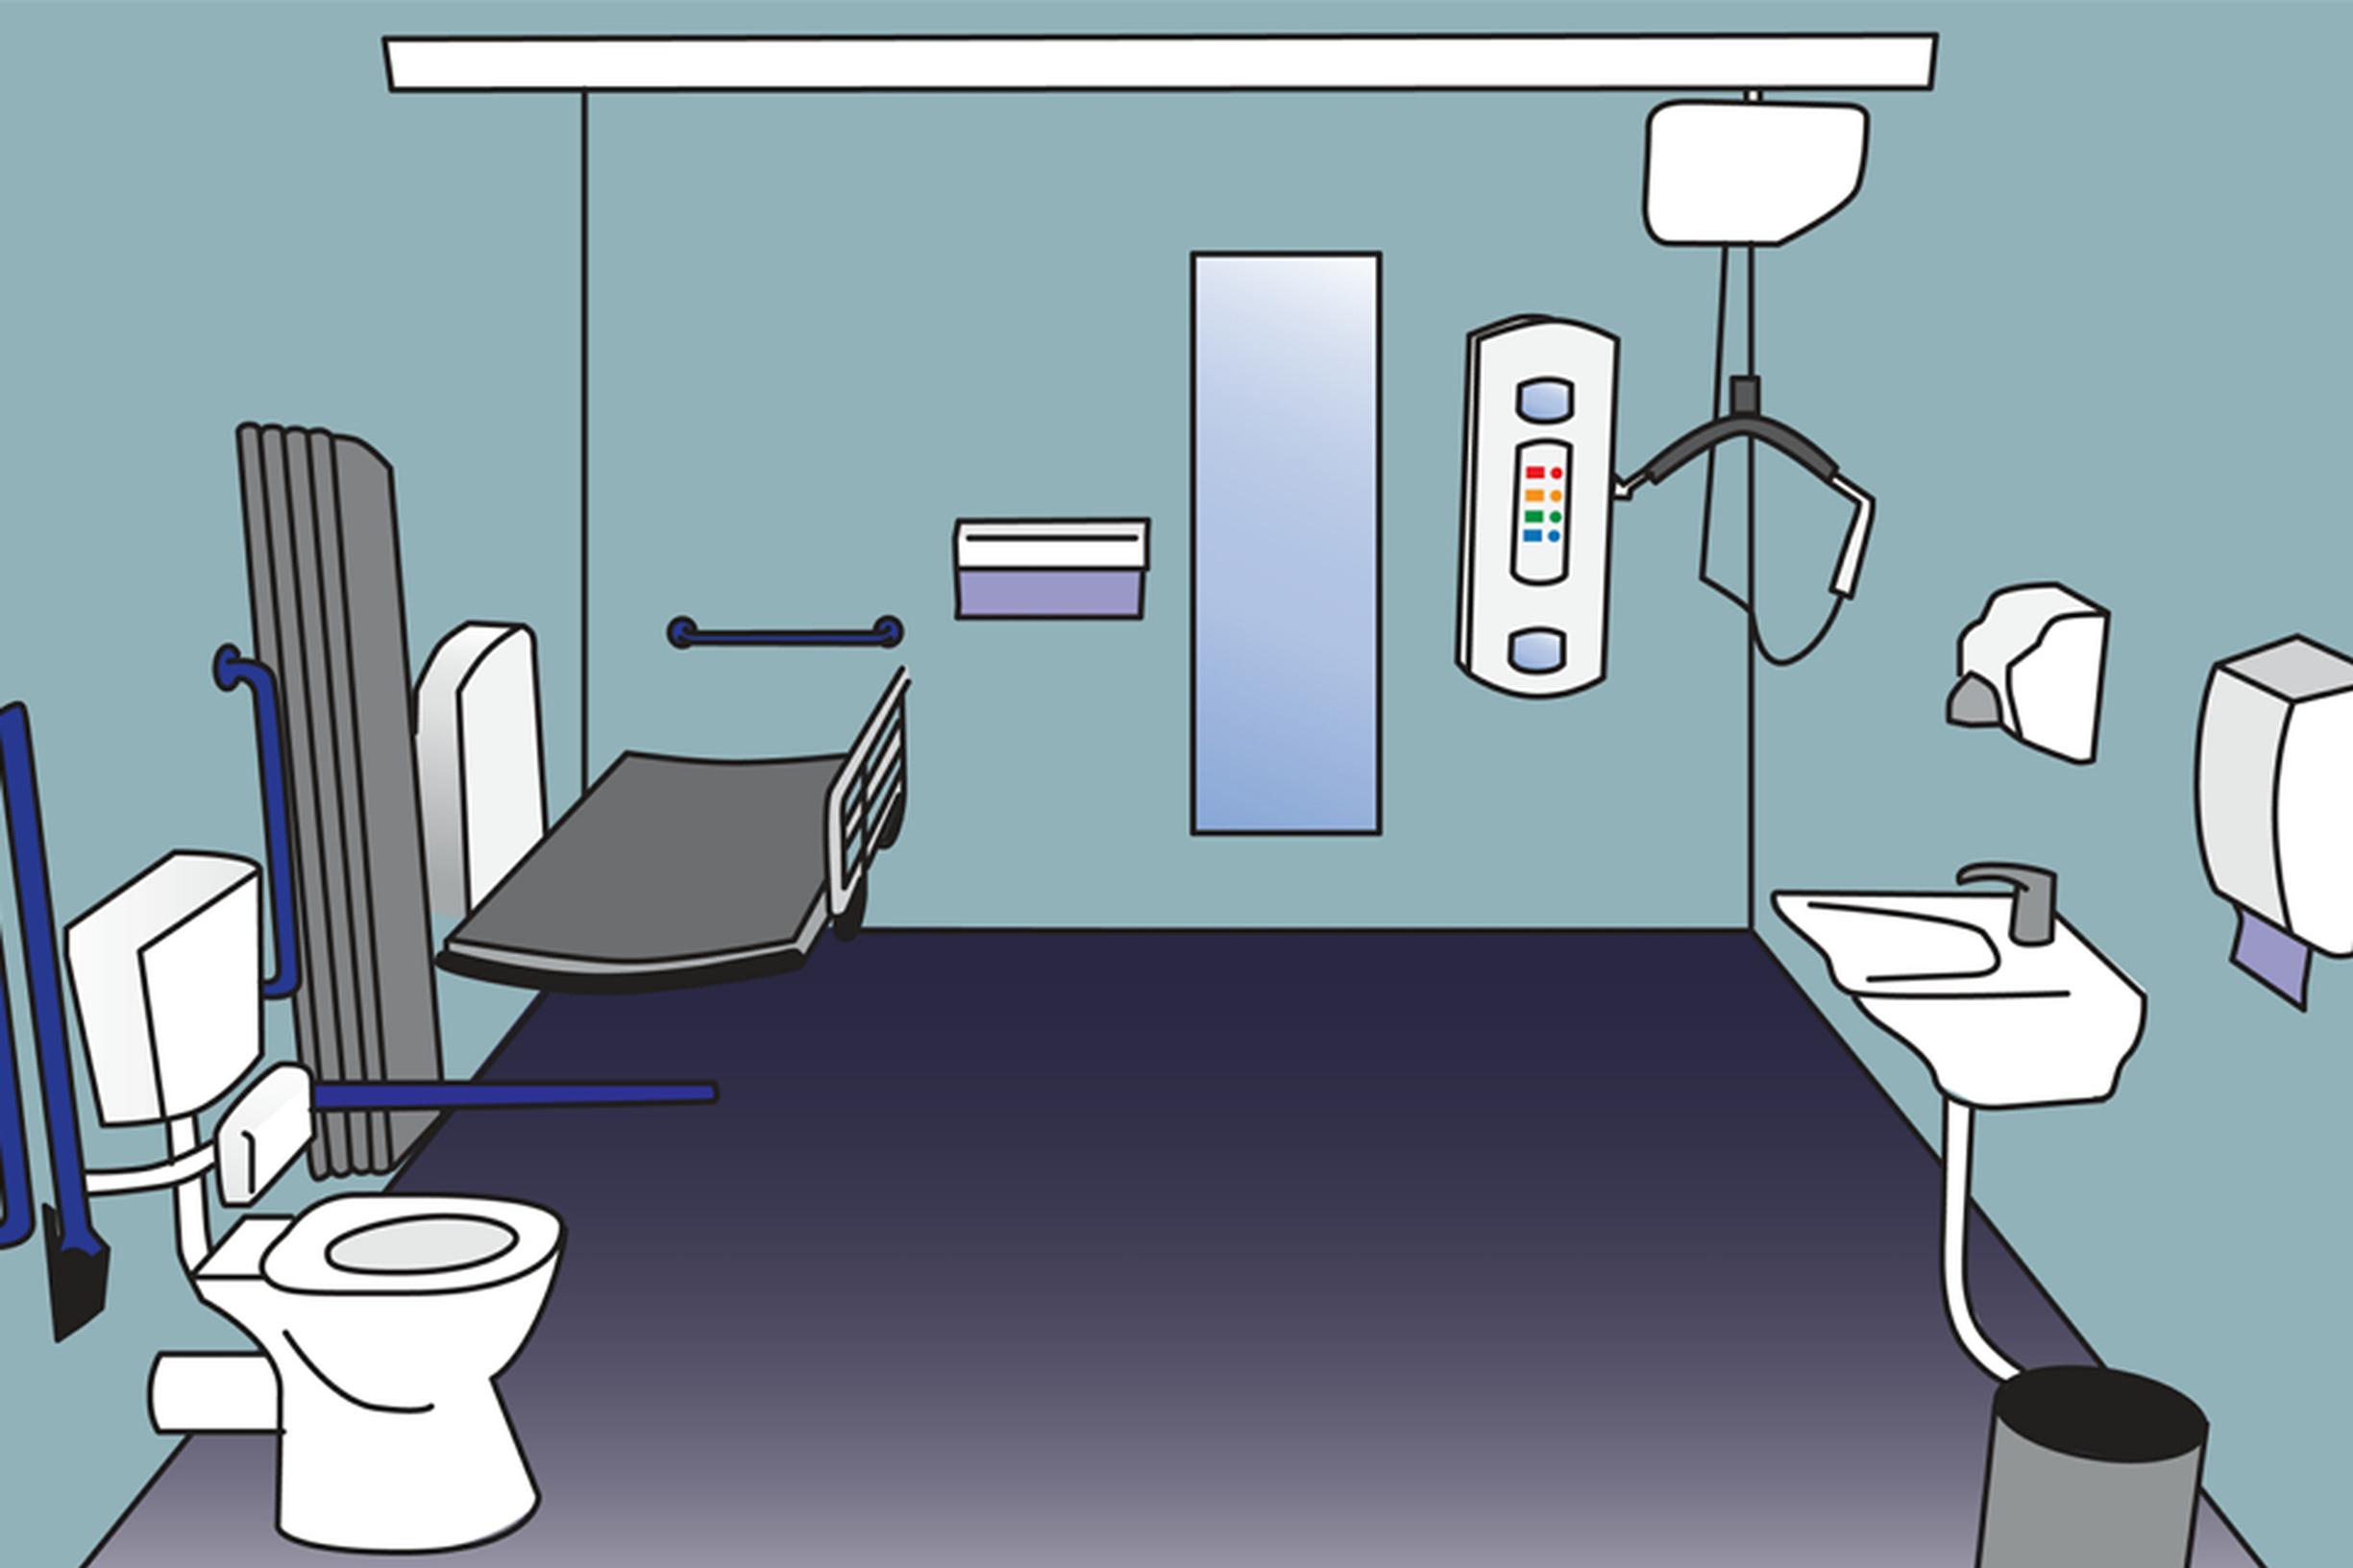 Changing Places toilets are larger accessible toilets for people who cannot use standard accessible toilets, with equipment such as hoists, curtains, adult-sized changing benches, and space for carers